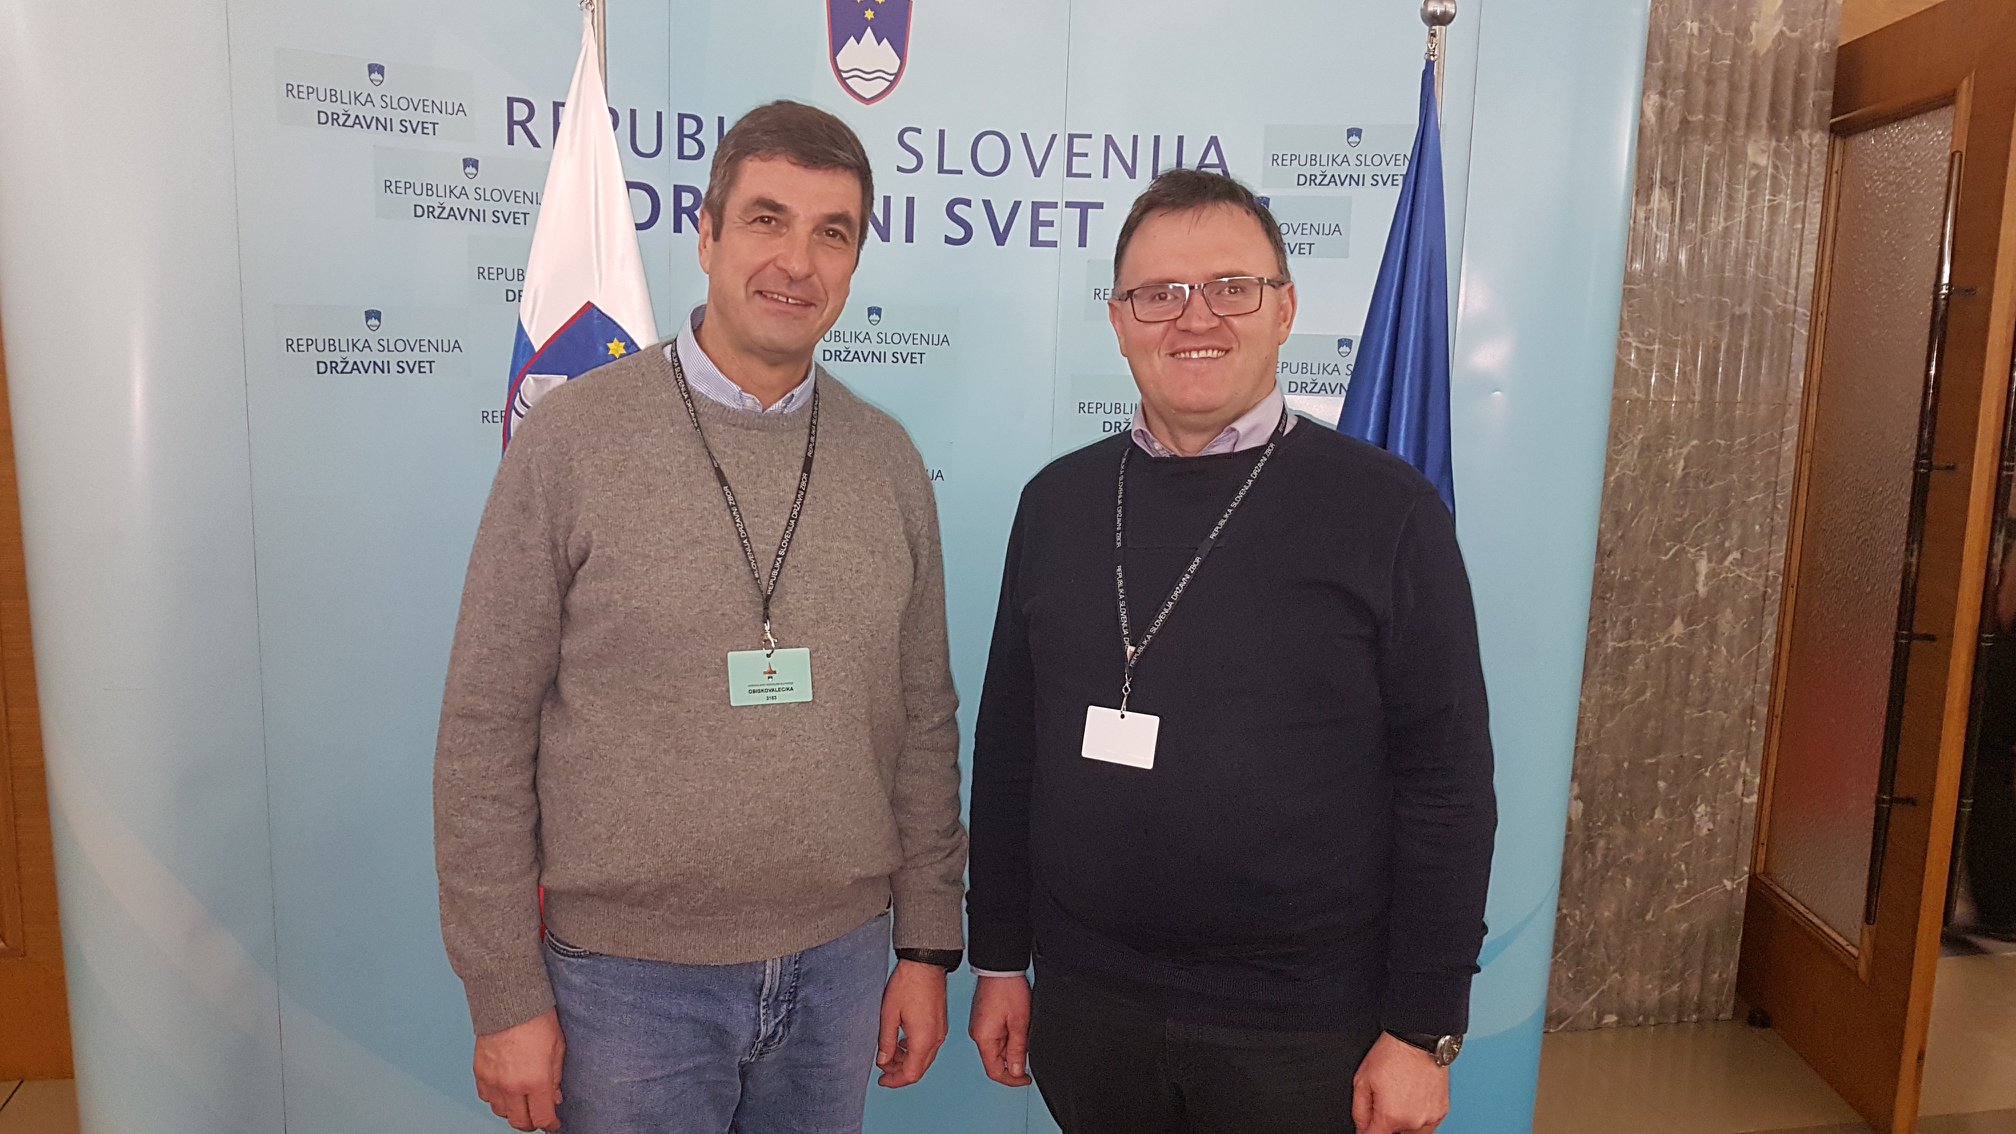 ECOBREED project at the National Council of the Republic of Slovenia